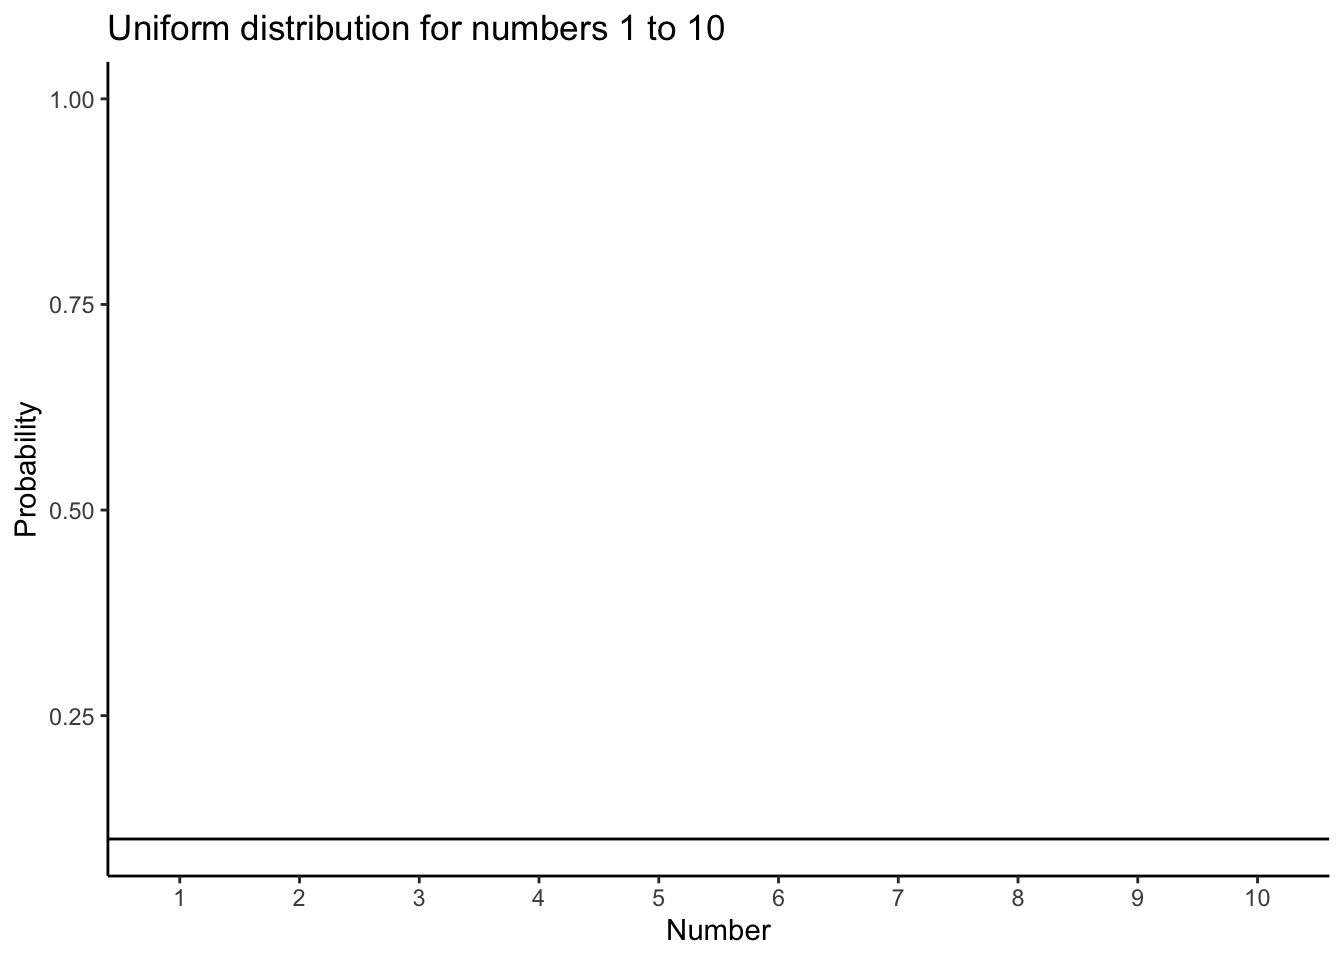 Uniform distribution showing that the numbers from 1 to 10 have an equal probability of being sampled